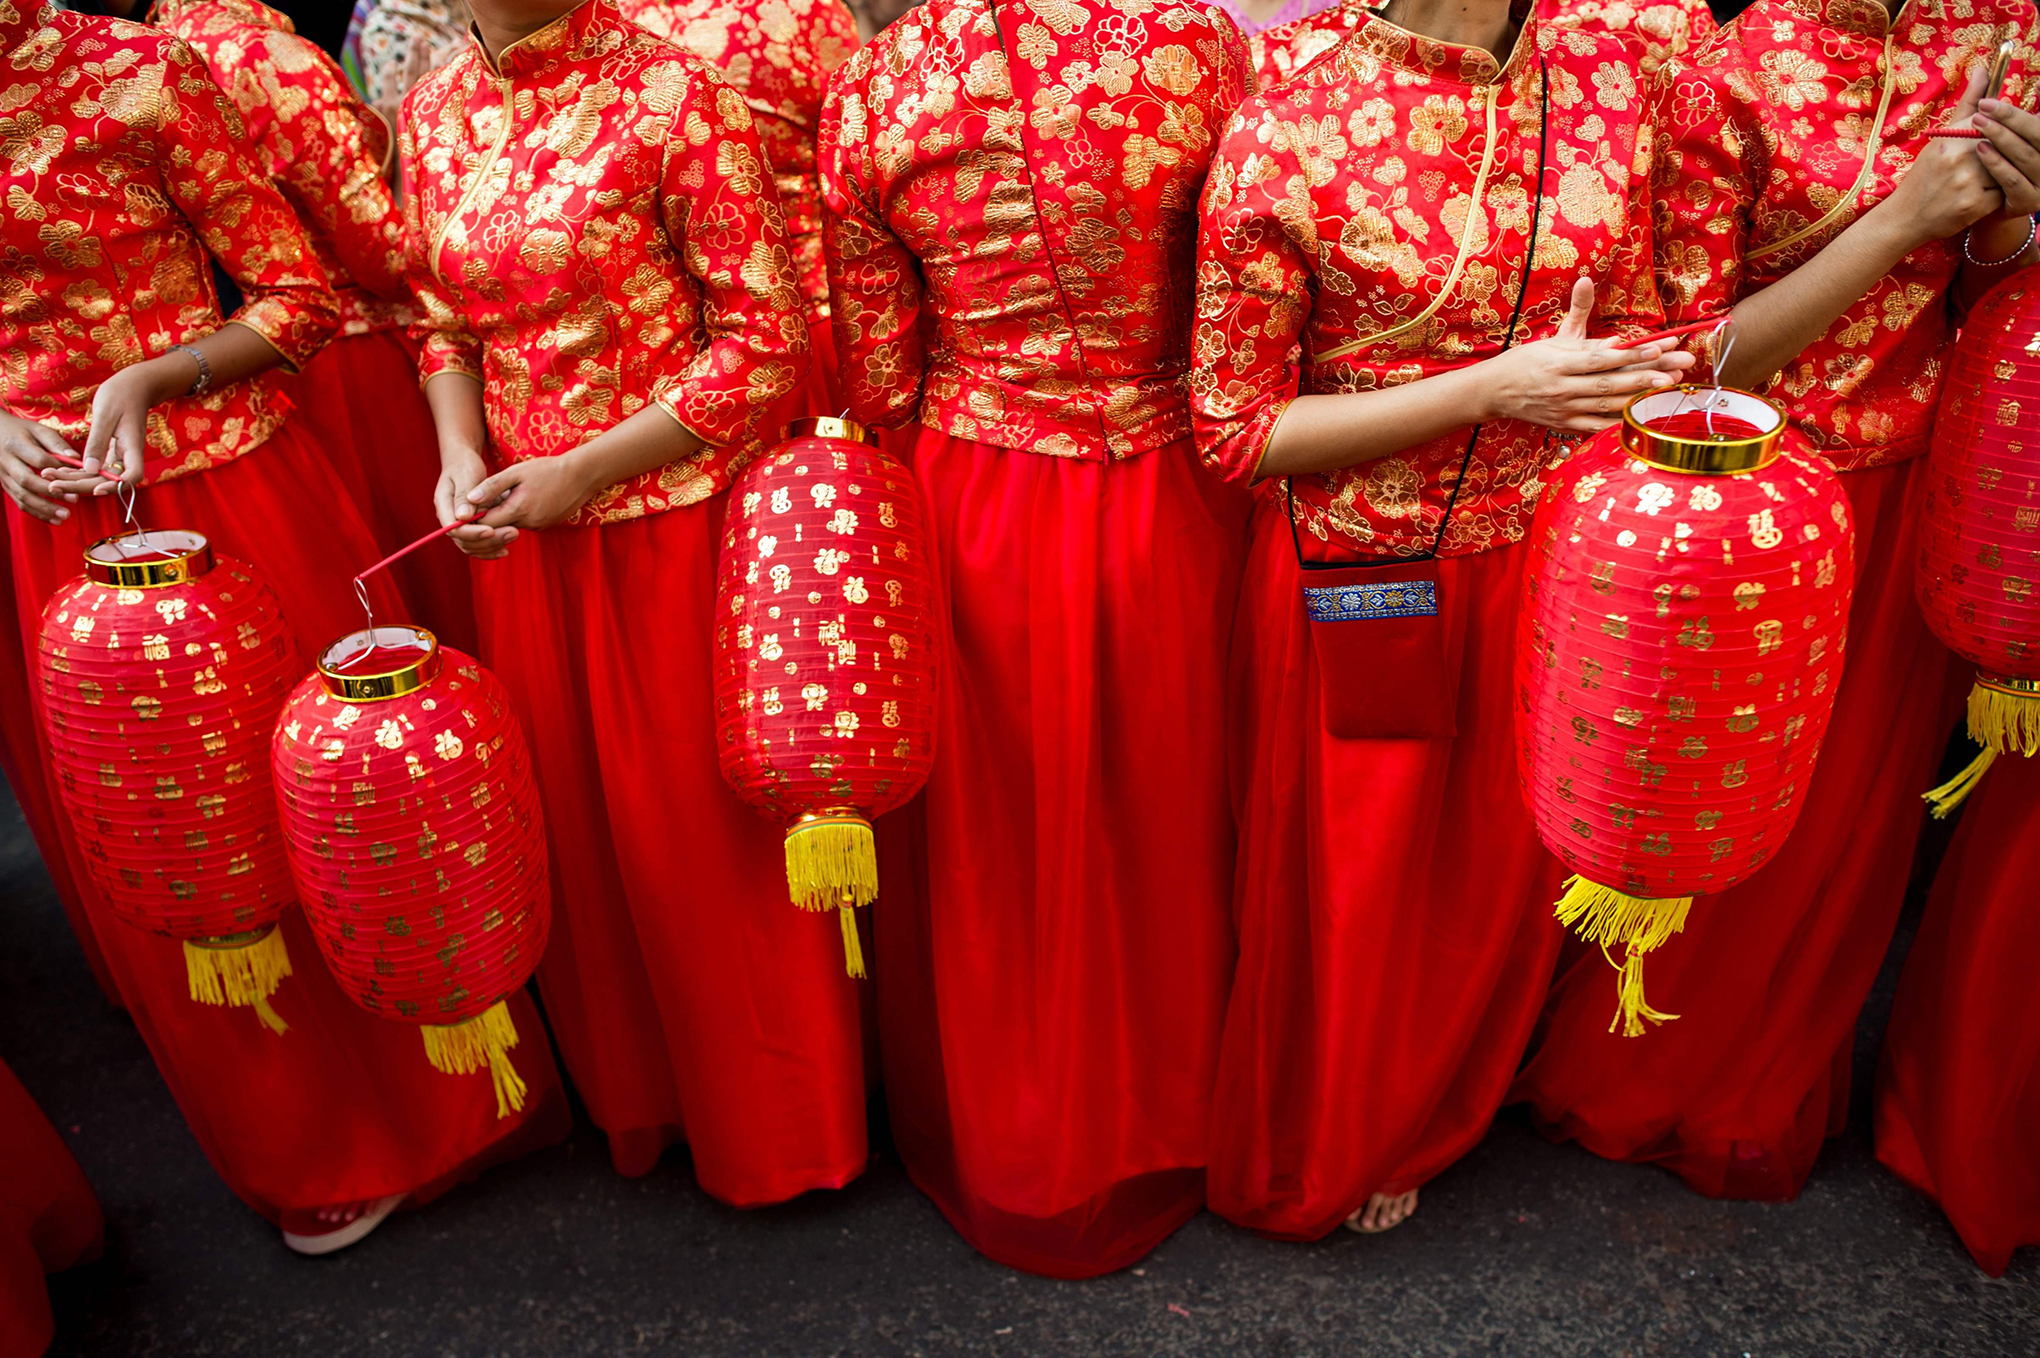 Young women in traditional Chinese costumes hold lanterns as they take part in celebrations marking the first day of the Lunar New Year in Yangon's Chinatown district on Feb. 16, 2018.